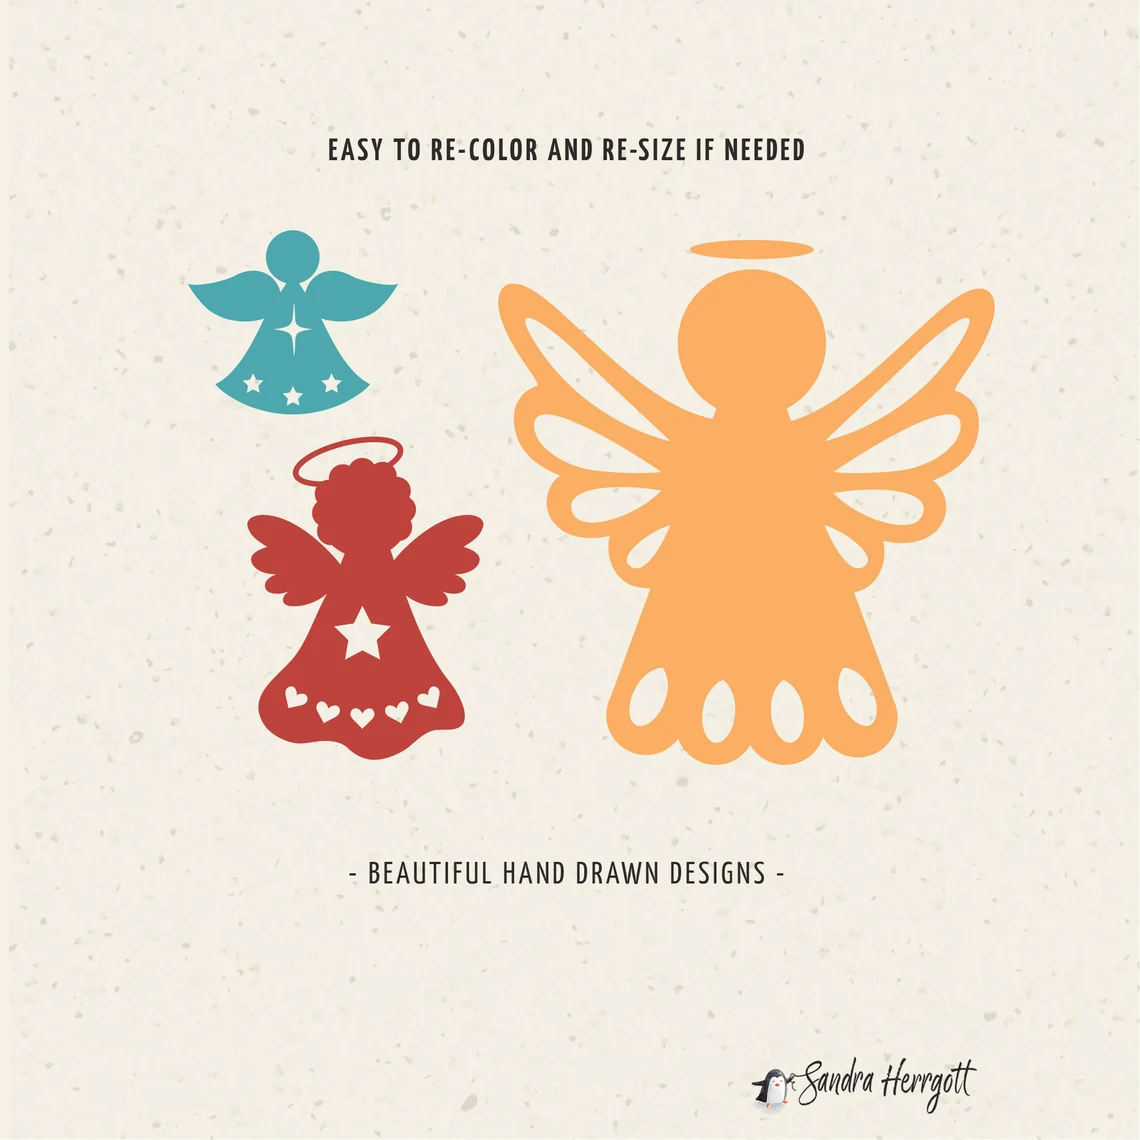 Small angels of different colors.